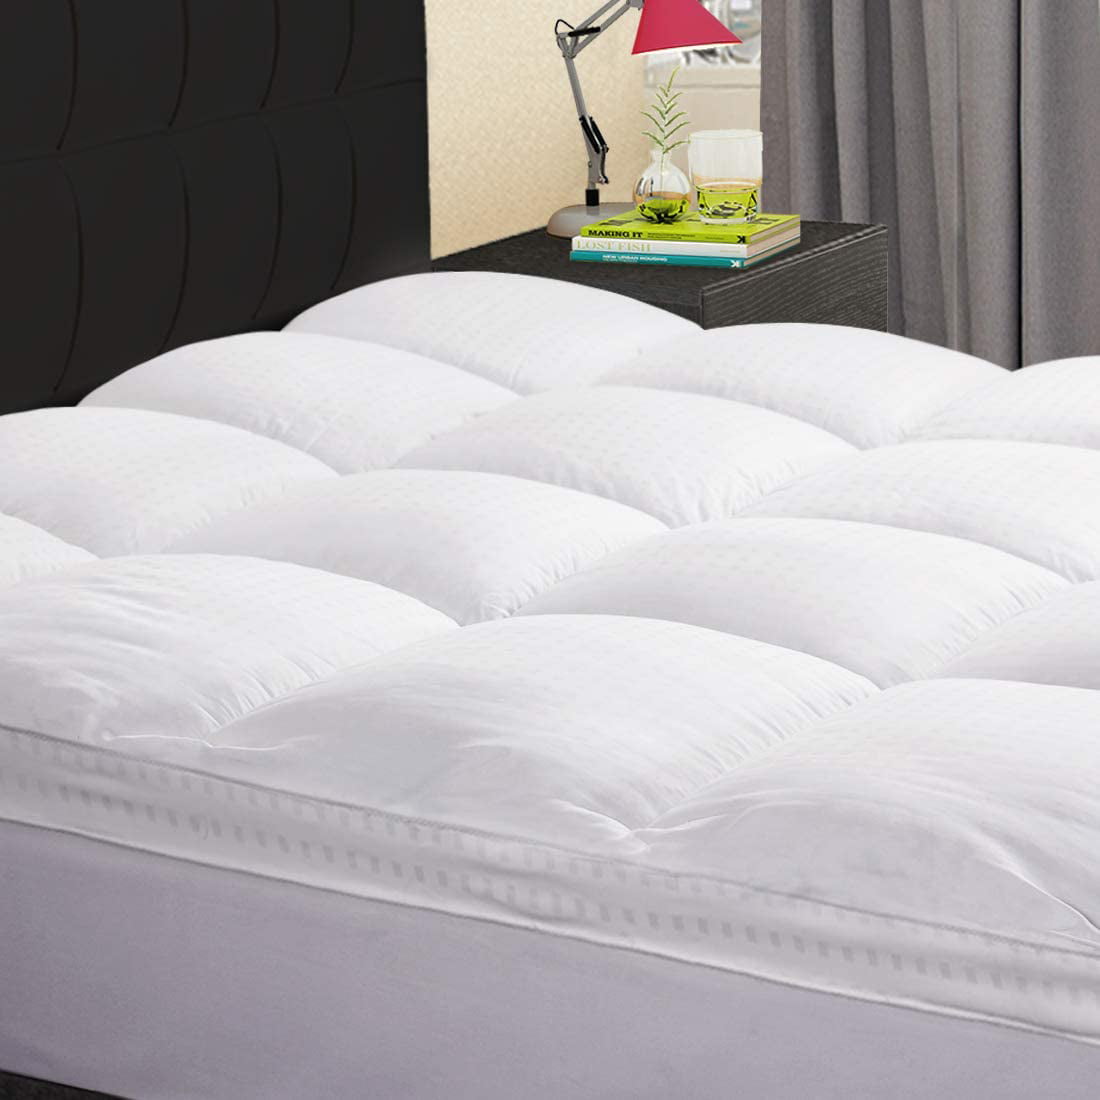 Details about   CHOKIT Extra Thick Queen Size Mattress Topper Cooling Cotton Mattress Pad Cover